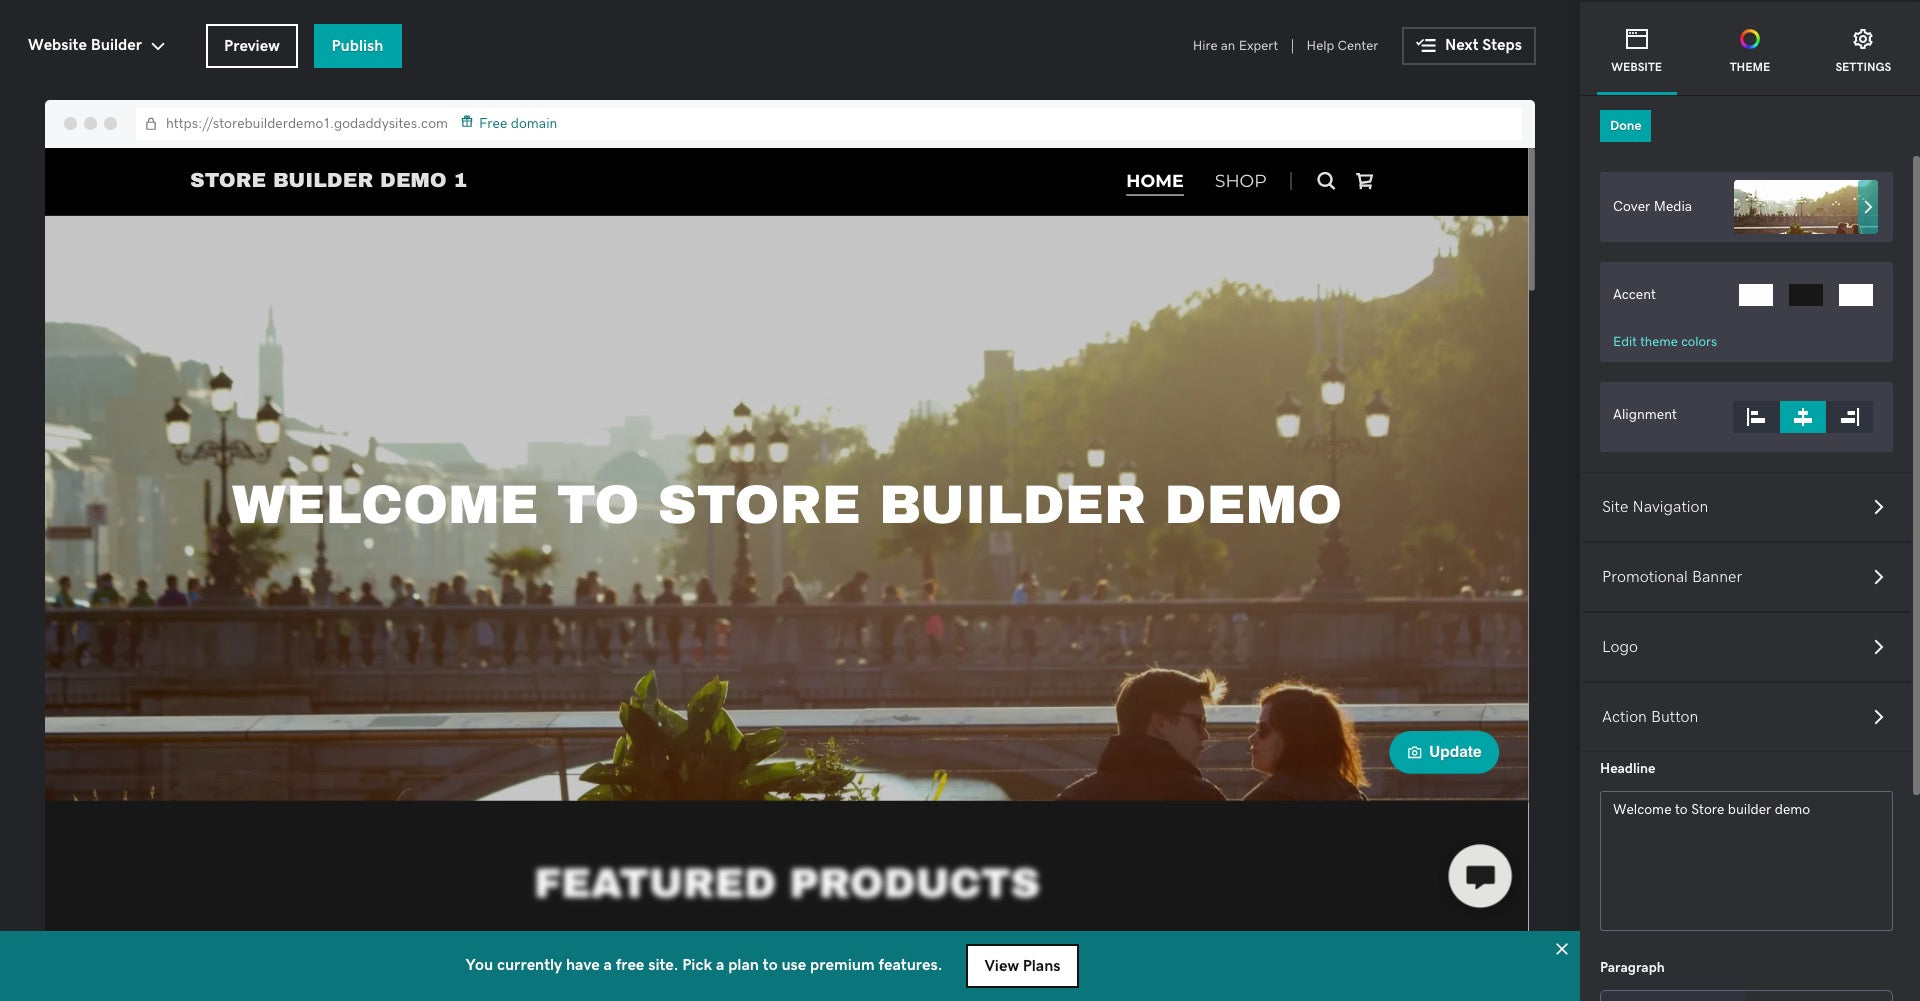 Preview screen of the GoDaddy store builder demo